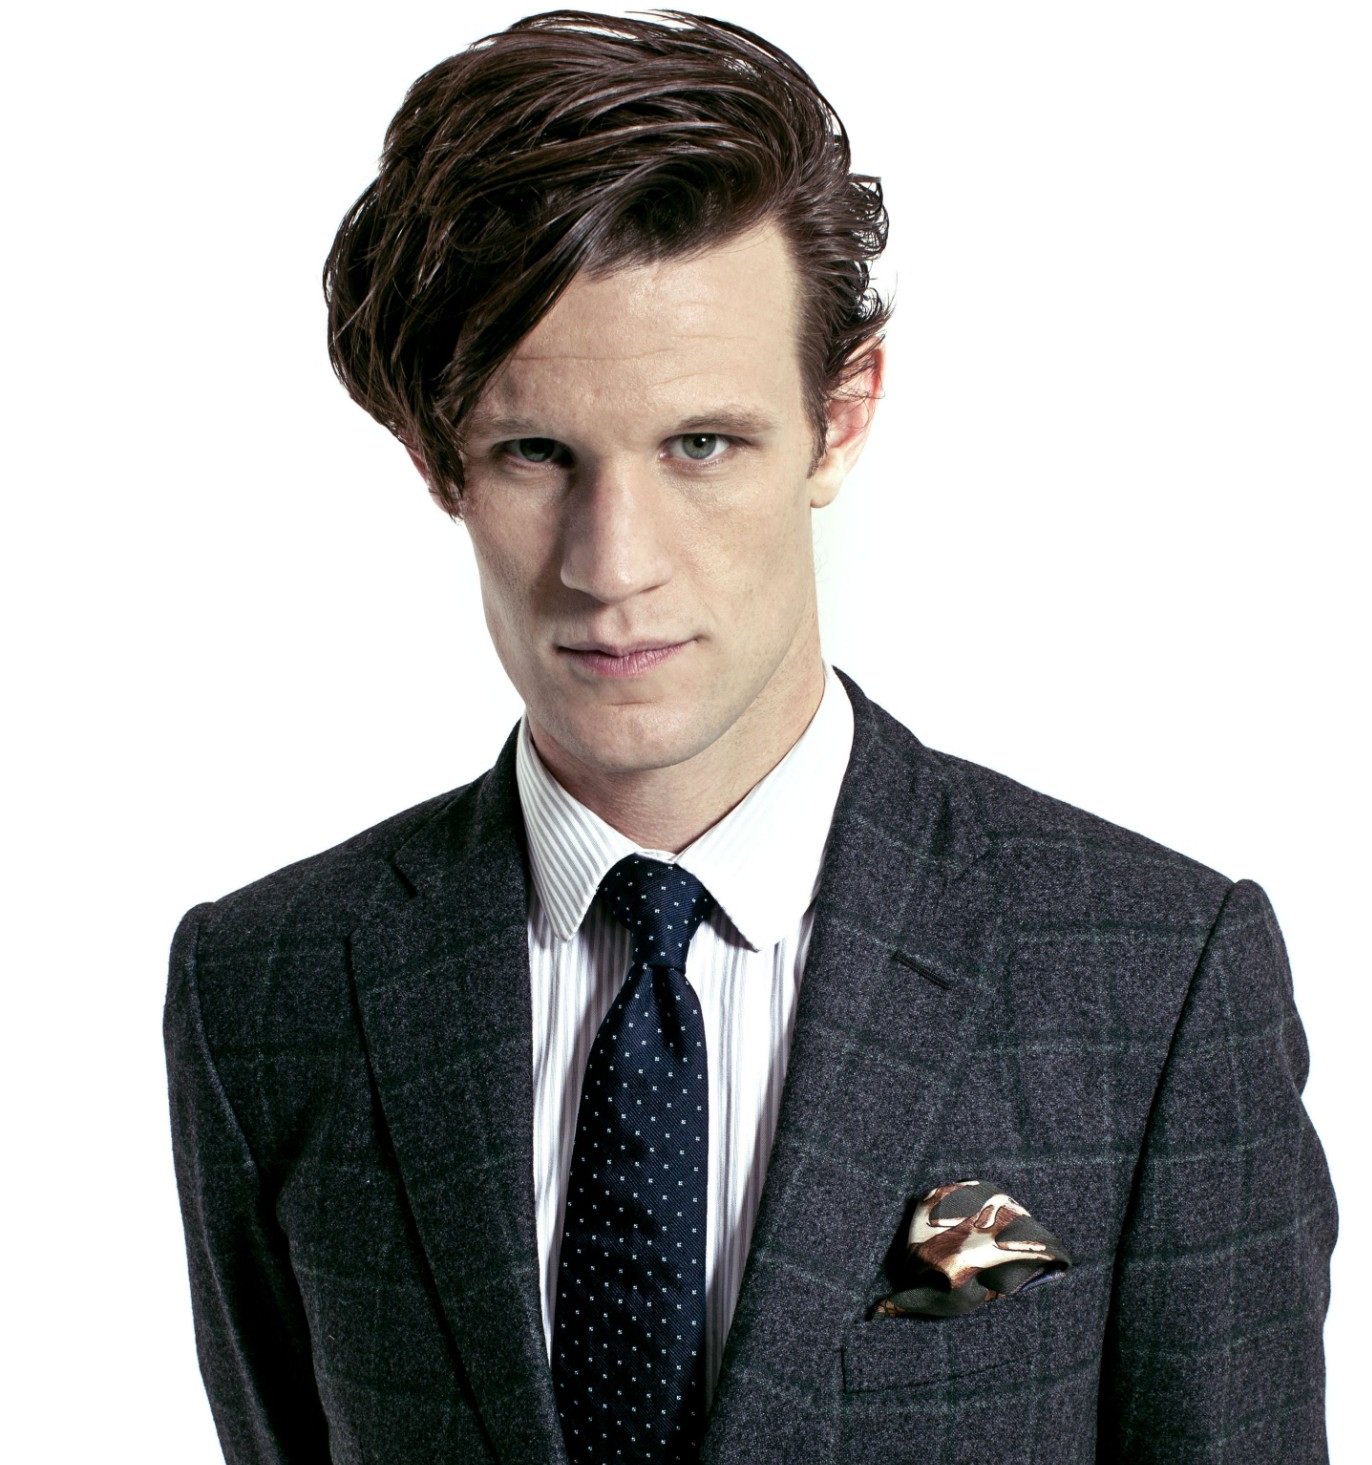 A very happy birthday to Doctor Number 11, Matt Smith, who turns 35 today 